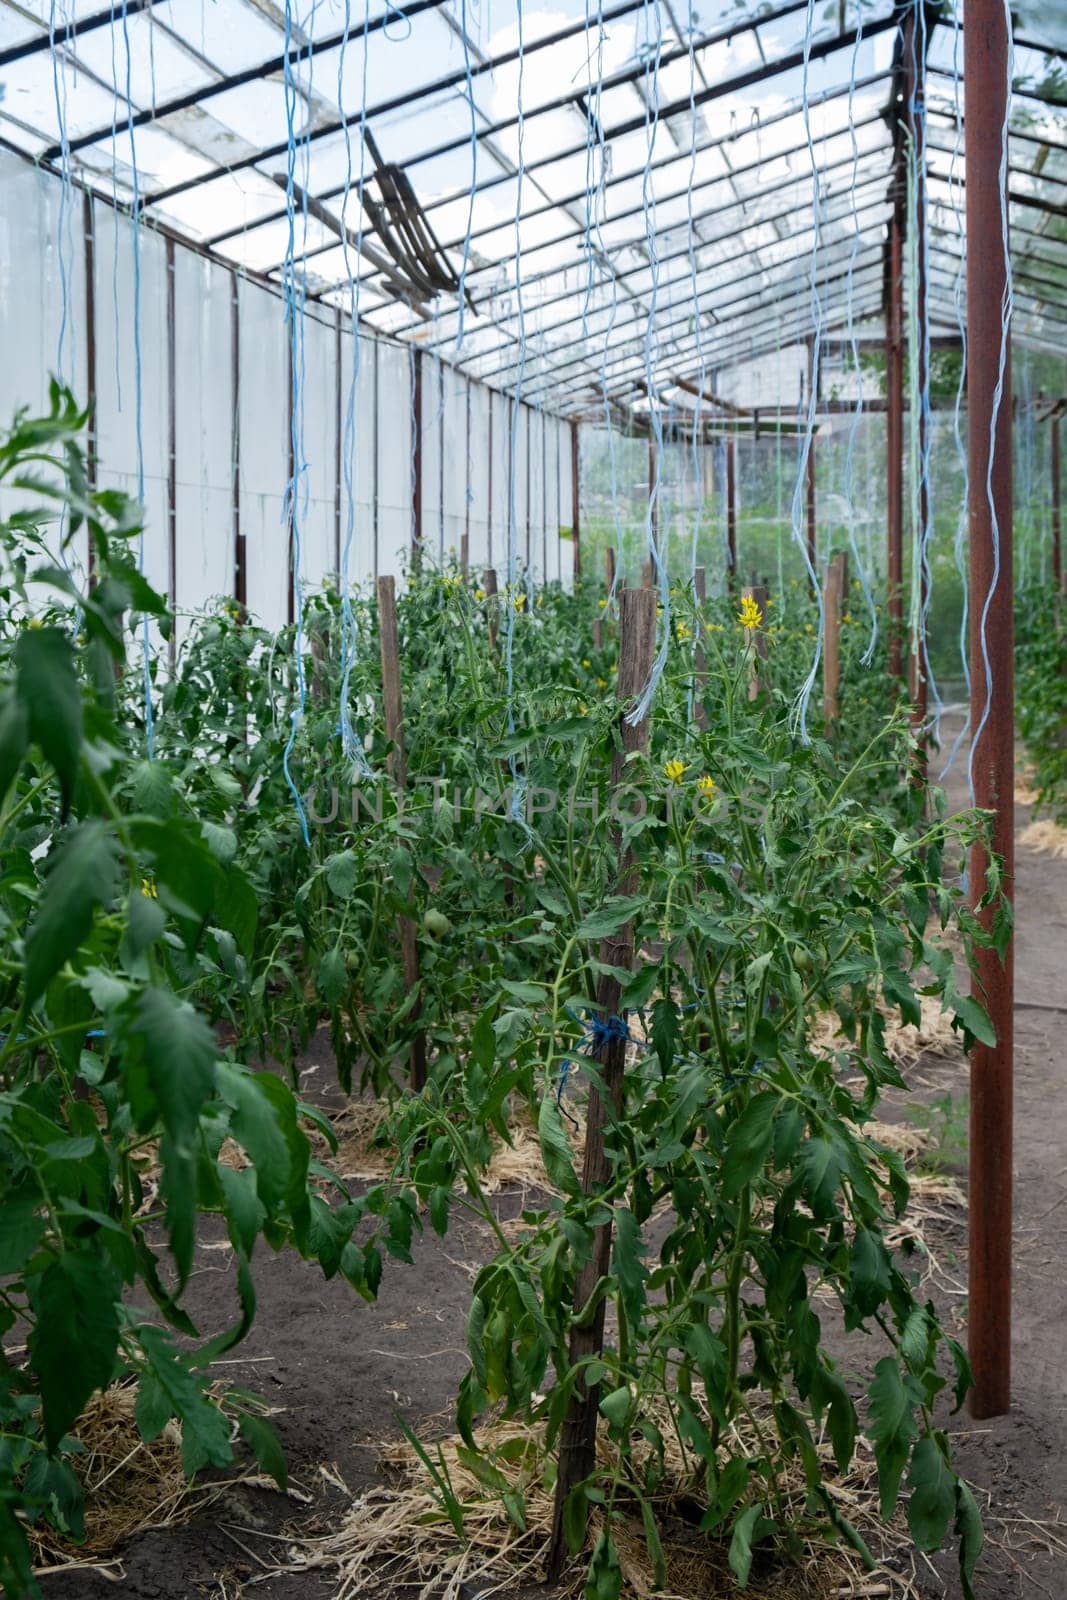 Glass Hothouse with green bush of raw grown tomatoes farming. Cherry tomatoes ripening on hanging stalk in greenhouse. Eco friendly vegan food produce